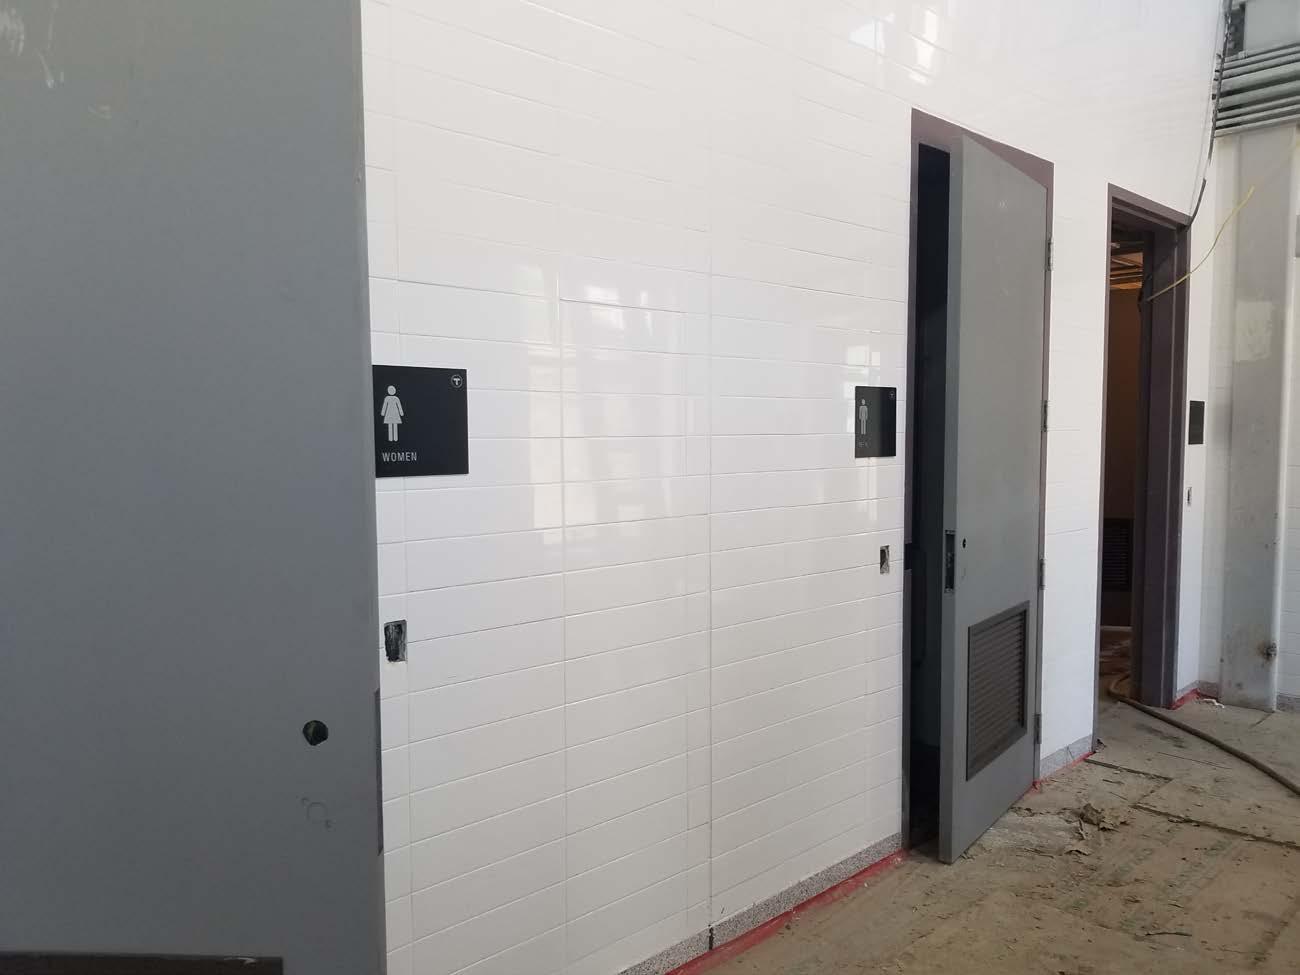 Installation of bathroom doors and signs complete (July 8, 2019)